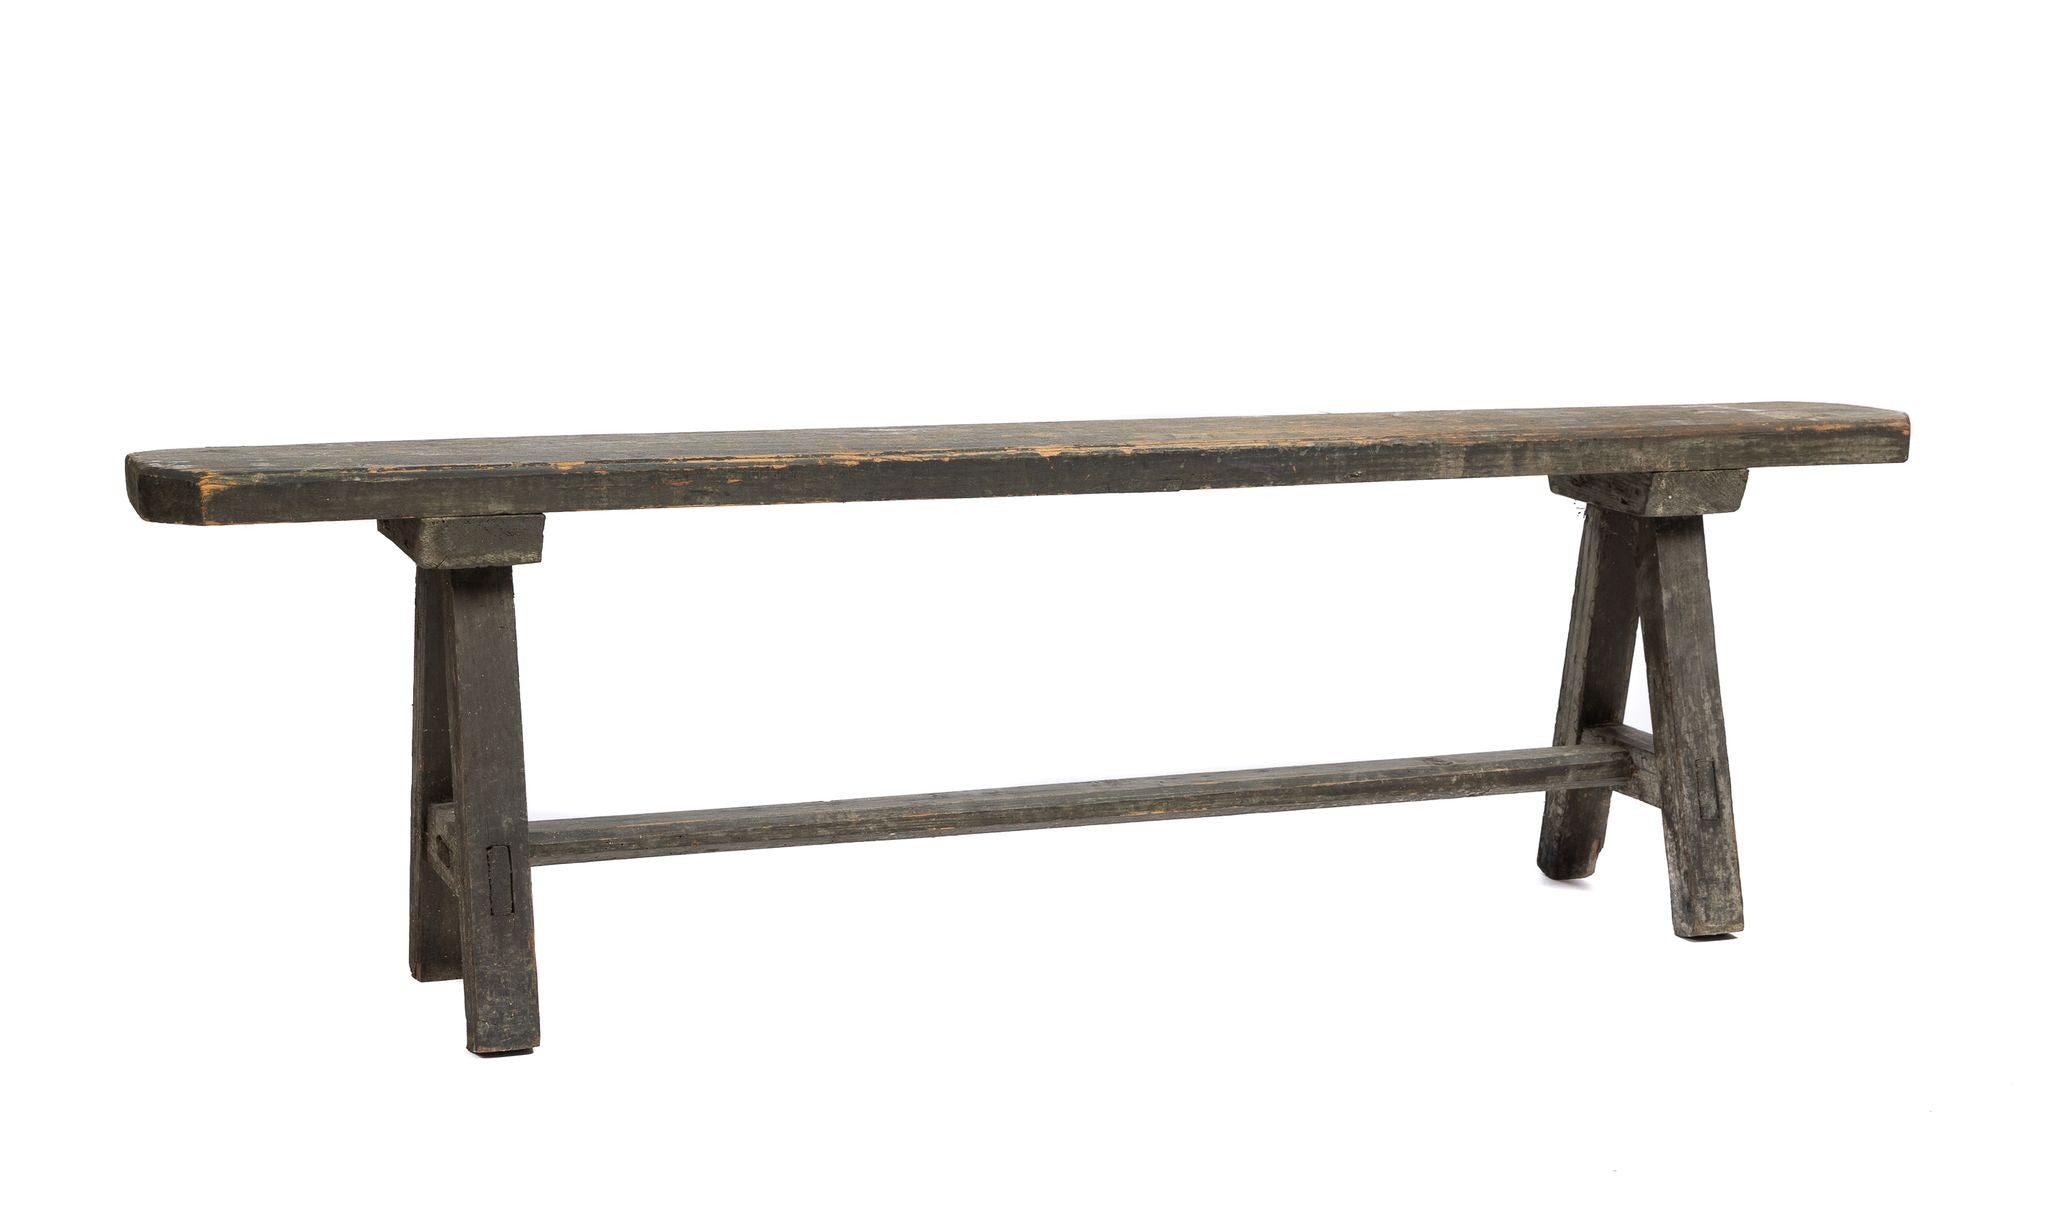 Vintage French rustic painted timber bench seat from The French Alps